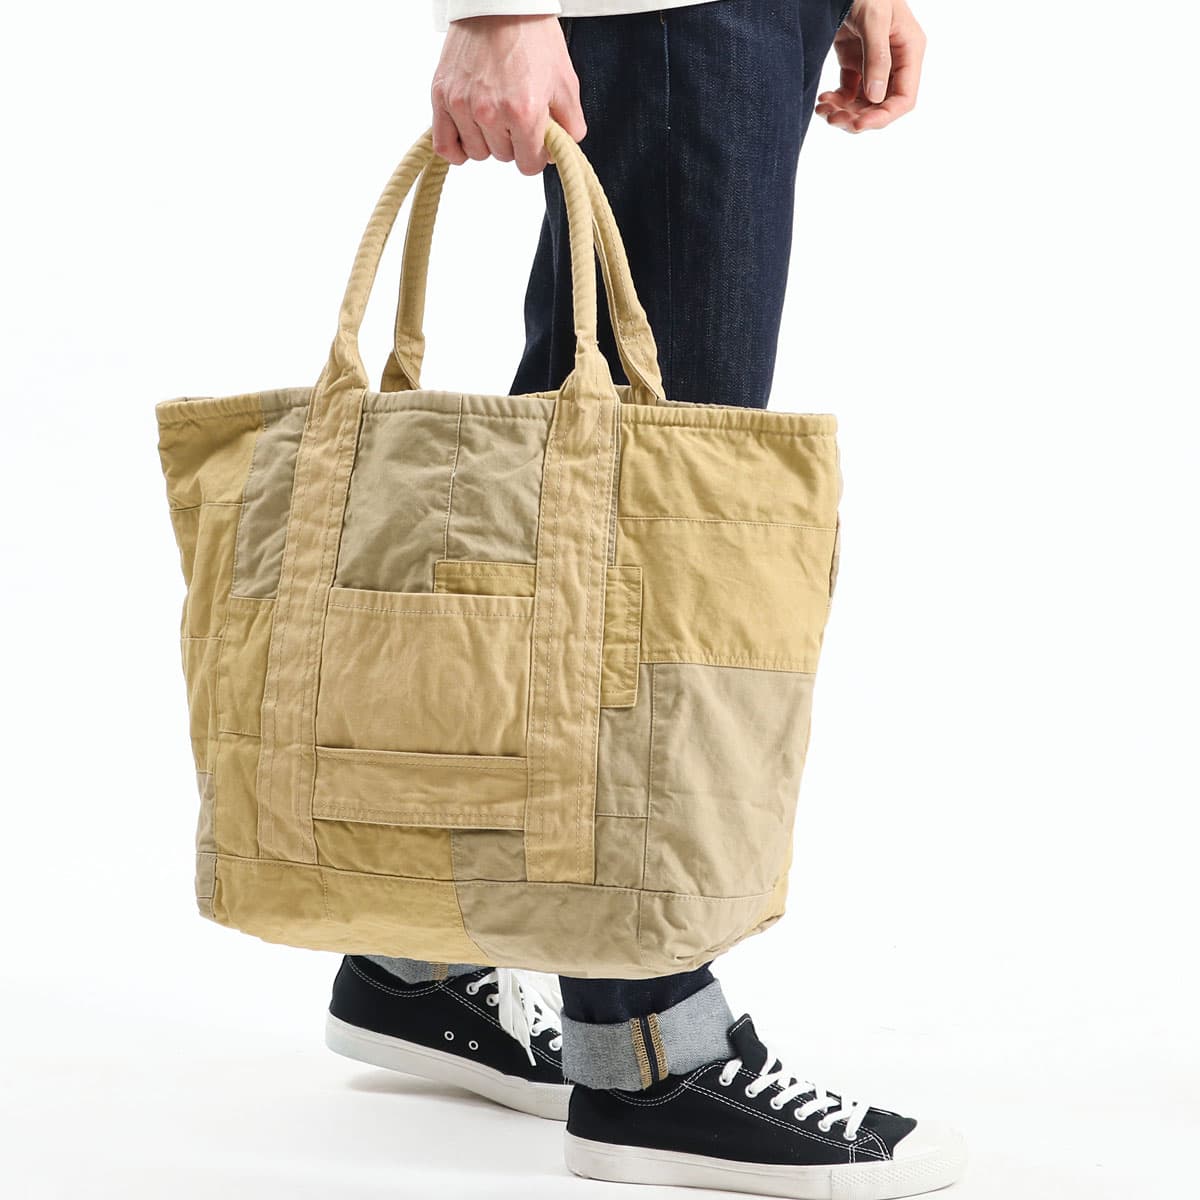 hobo ホーボー CARRY-ALL TOTE L UPCYCLED FRENCH ARMY CLOTH 29L HB-BG3414 ギャレリアモール/.galleria【全品送料無料】